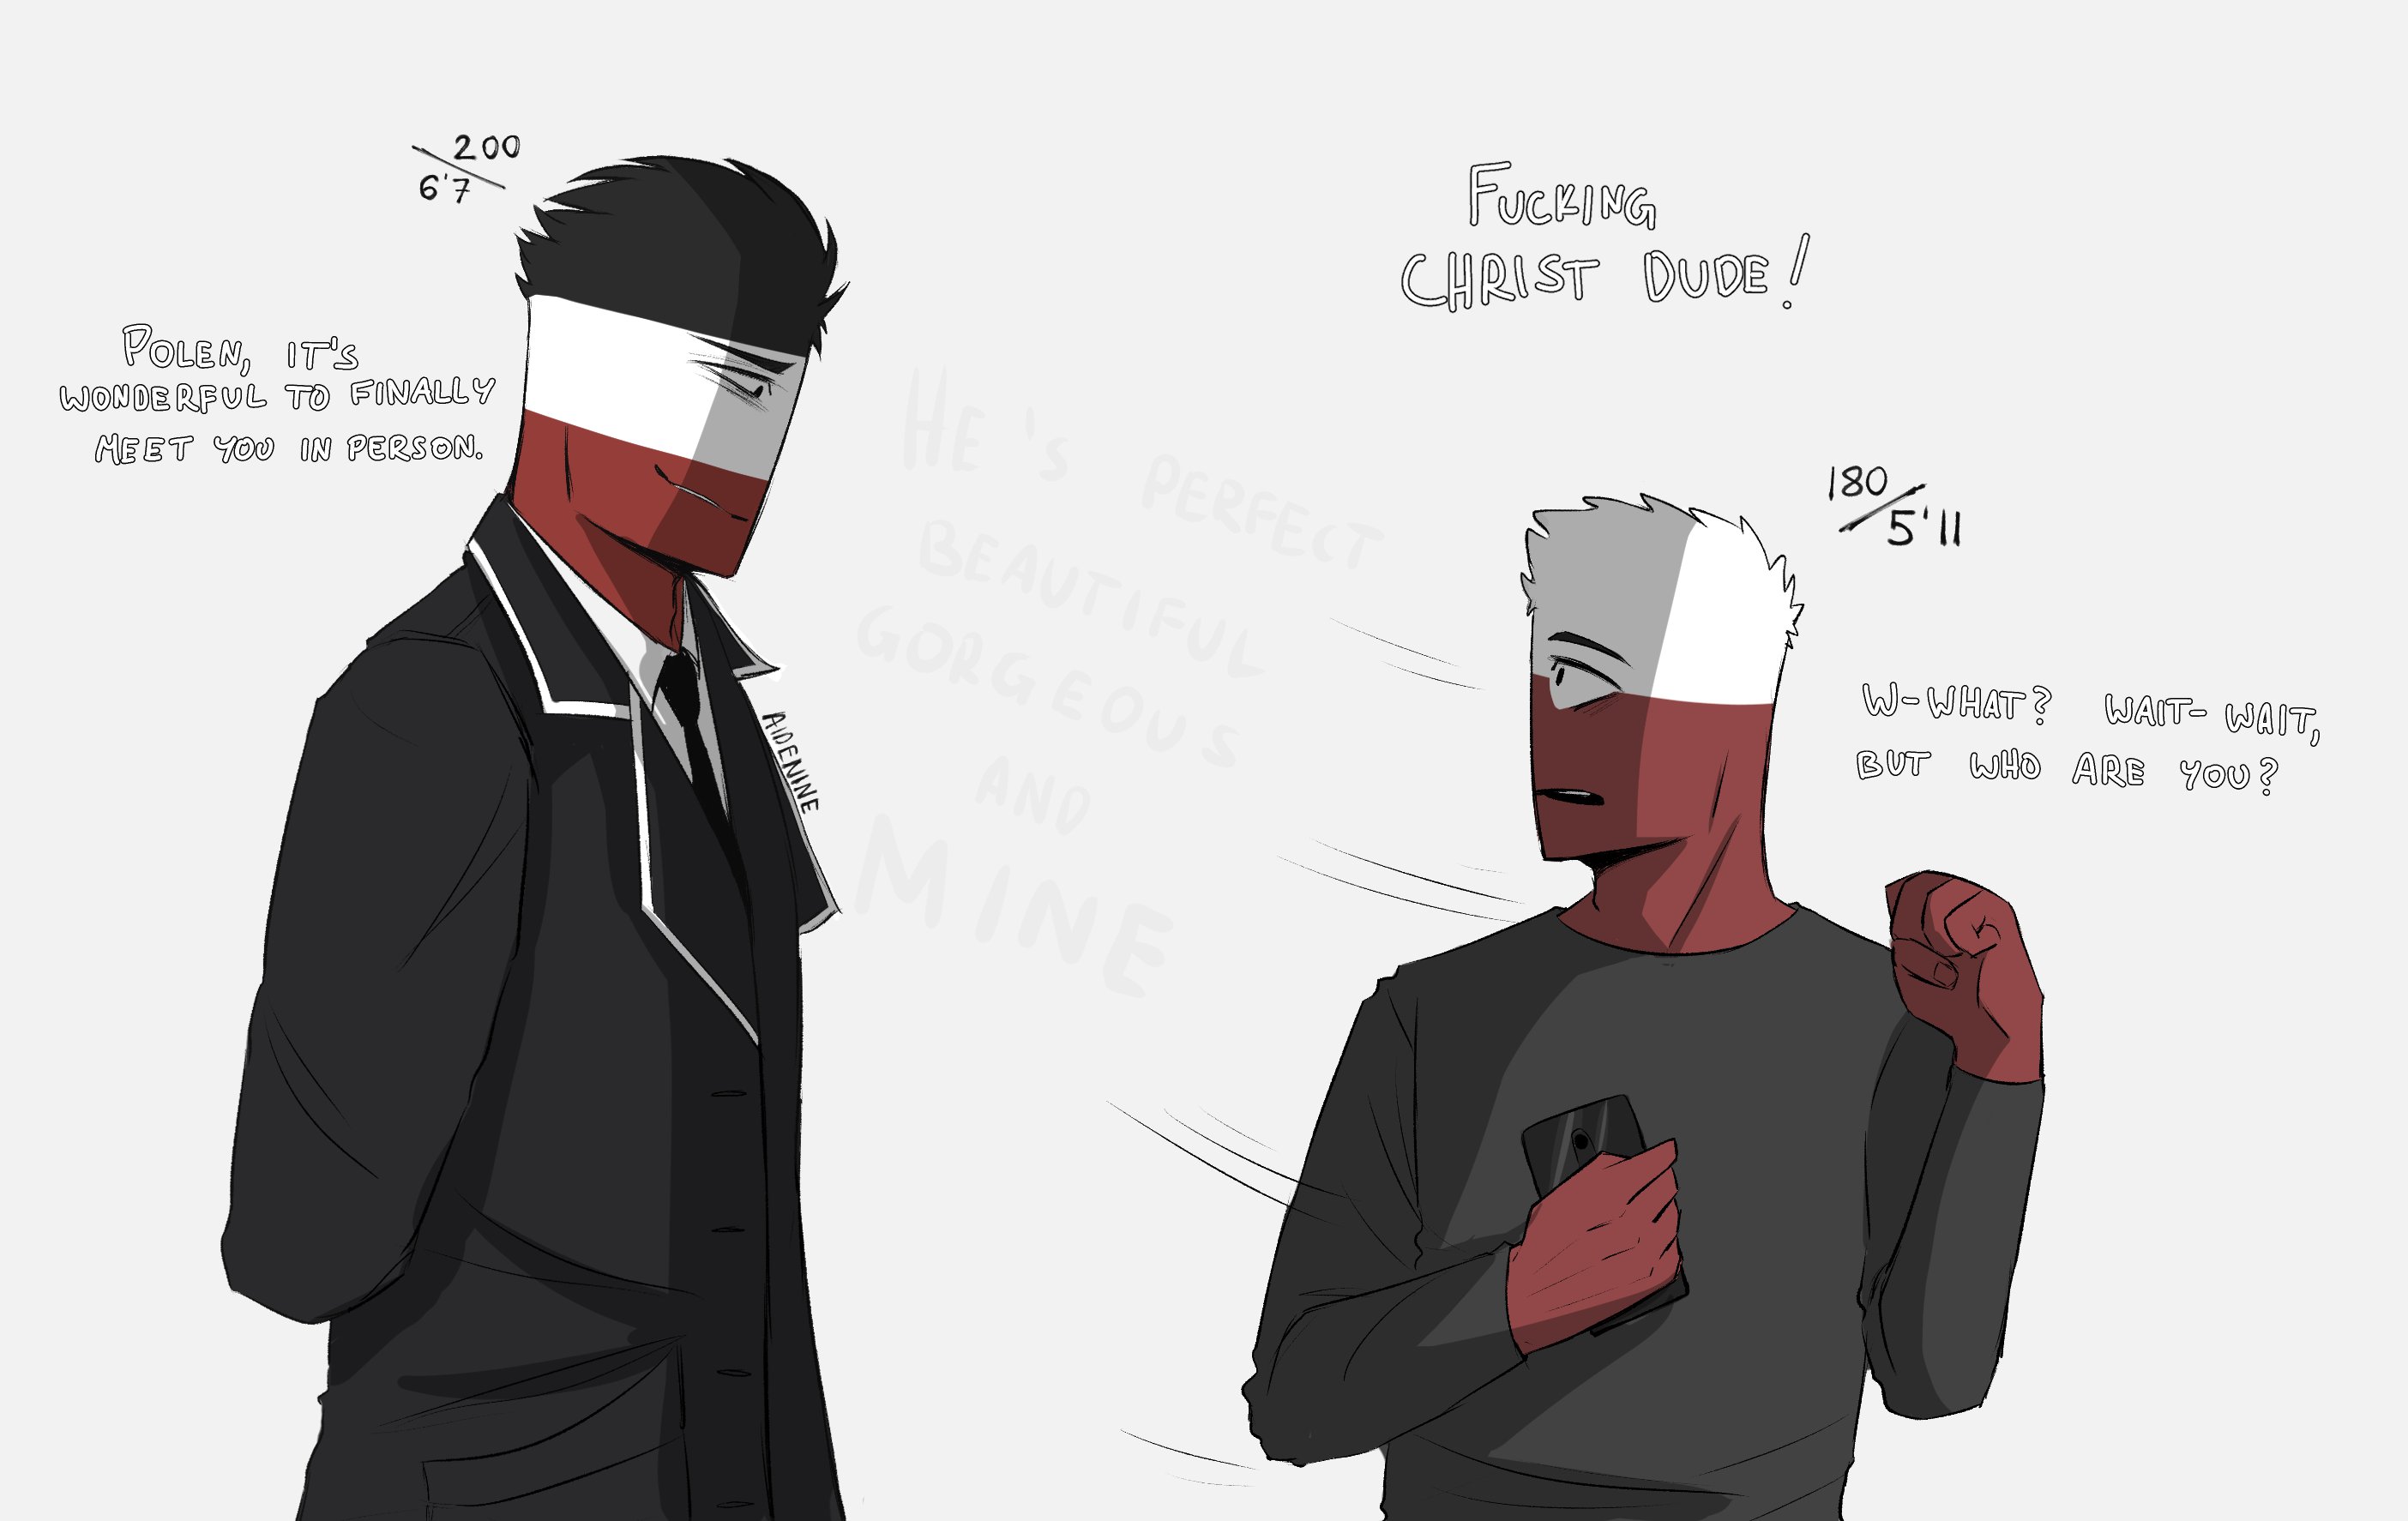 Rominite on X: I ship it Caname For LIFE #Countryhumans #Caname  #countryhumanscaname #countryhuman  / X